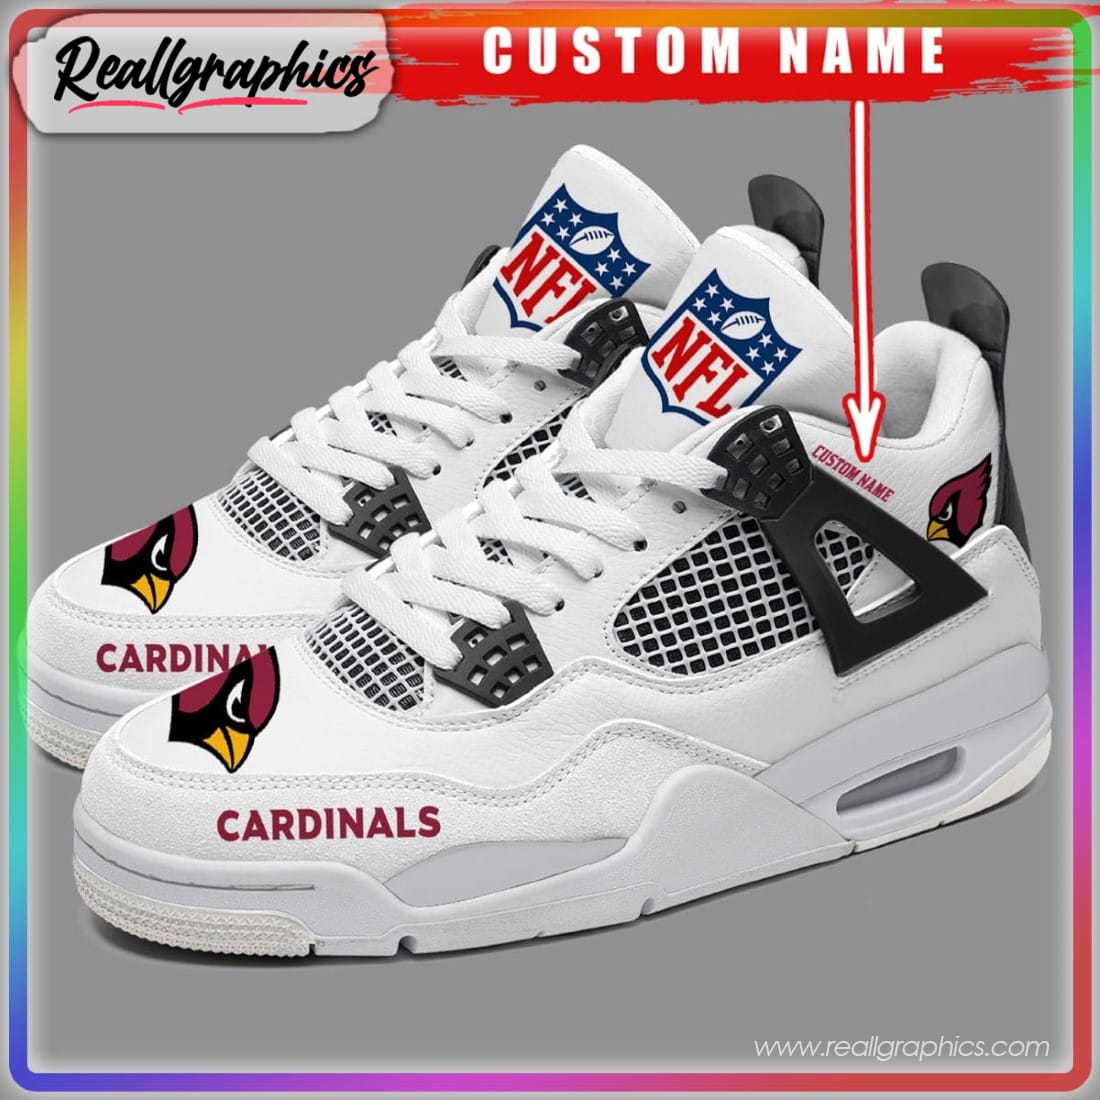 arizona cardinals nfl: jump into the endzone with style